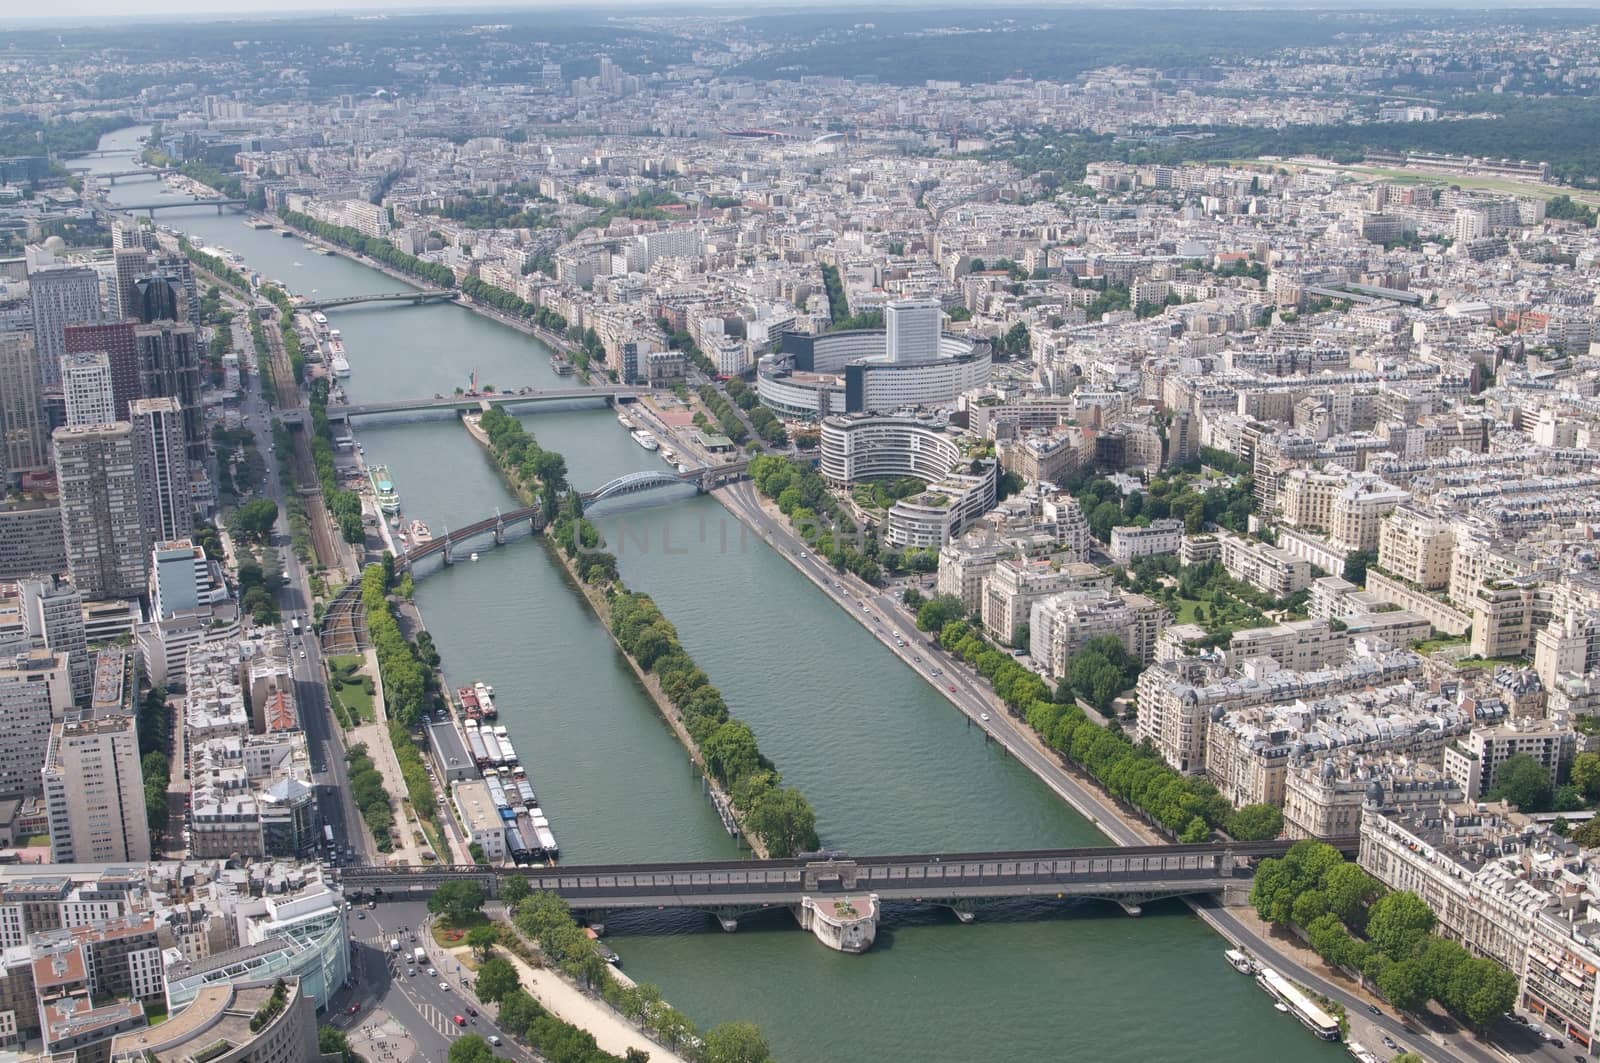 From the Eifel tower by dyvan